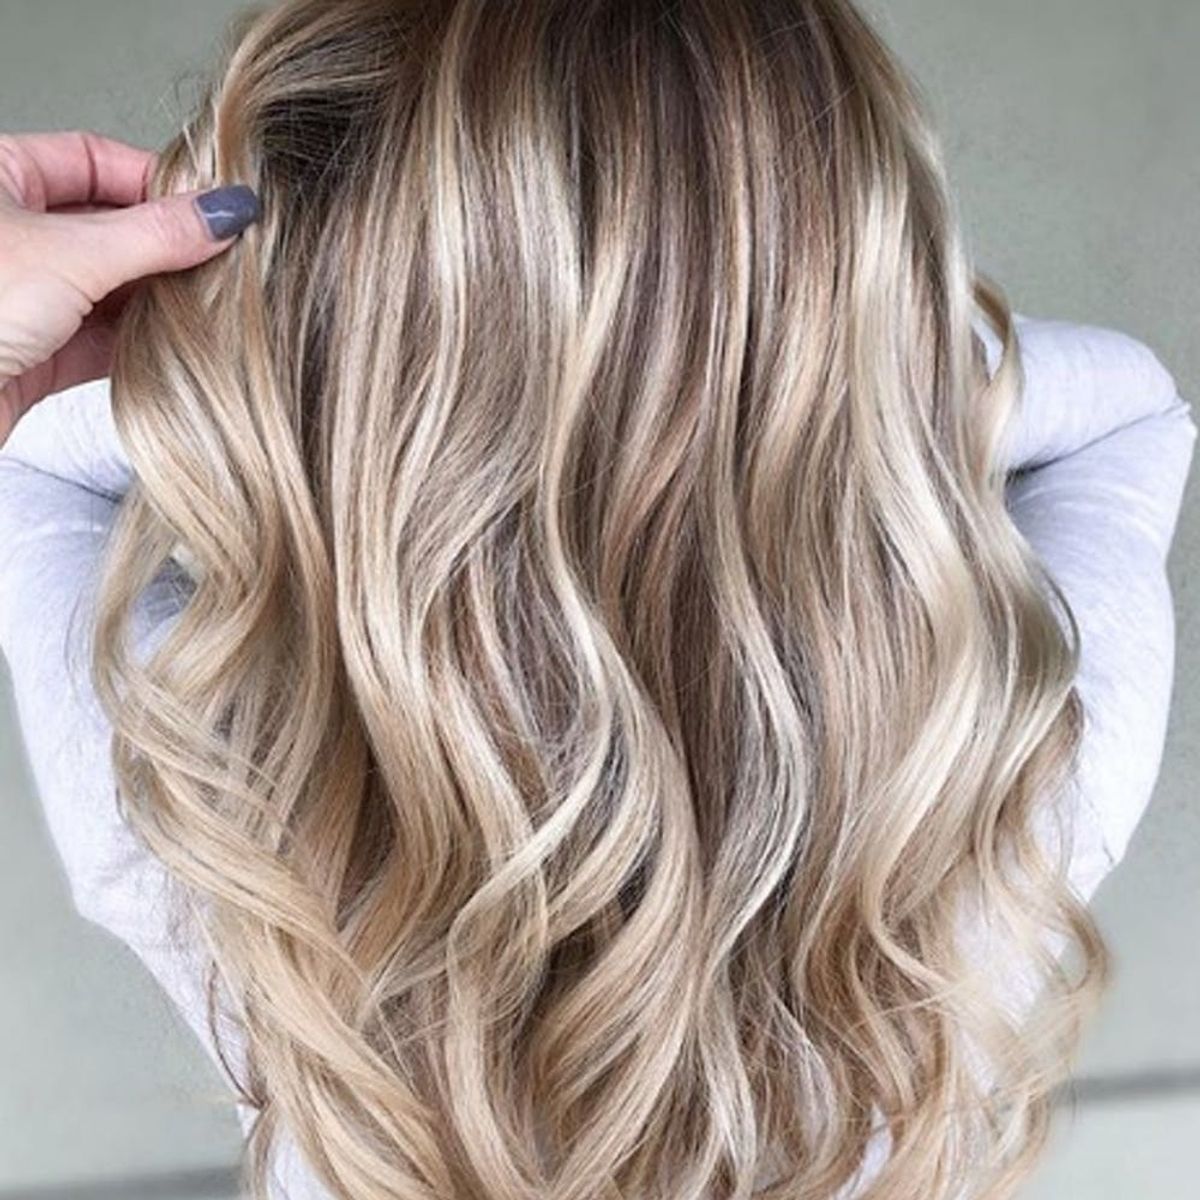 Everything You Need to Know About the Coffee Shop Hair Color Trend